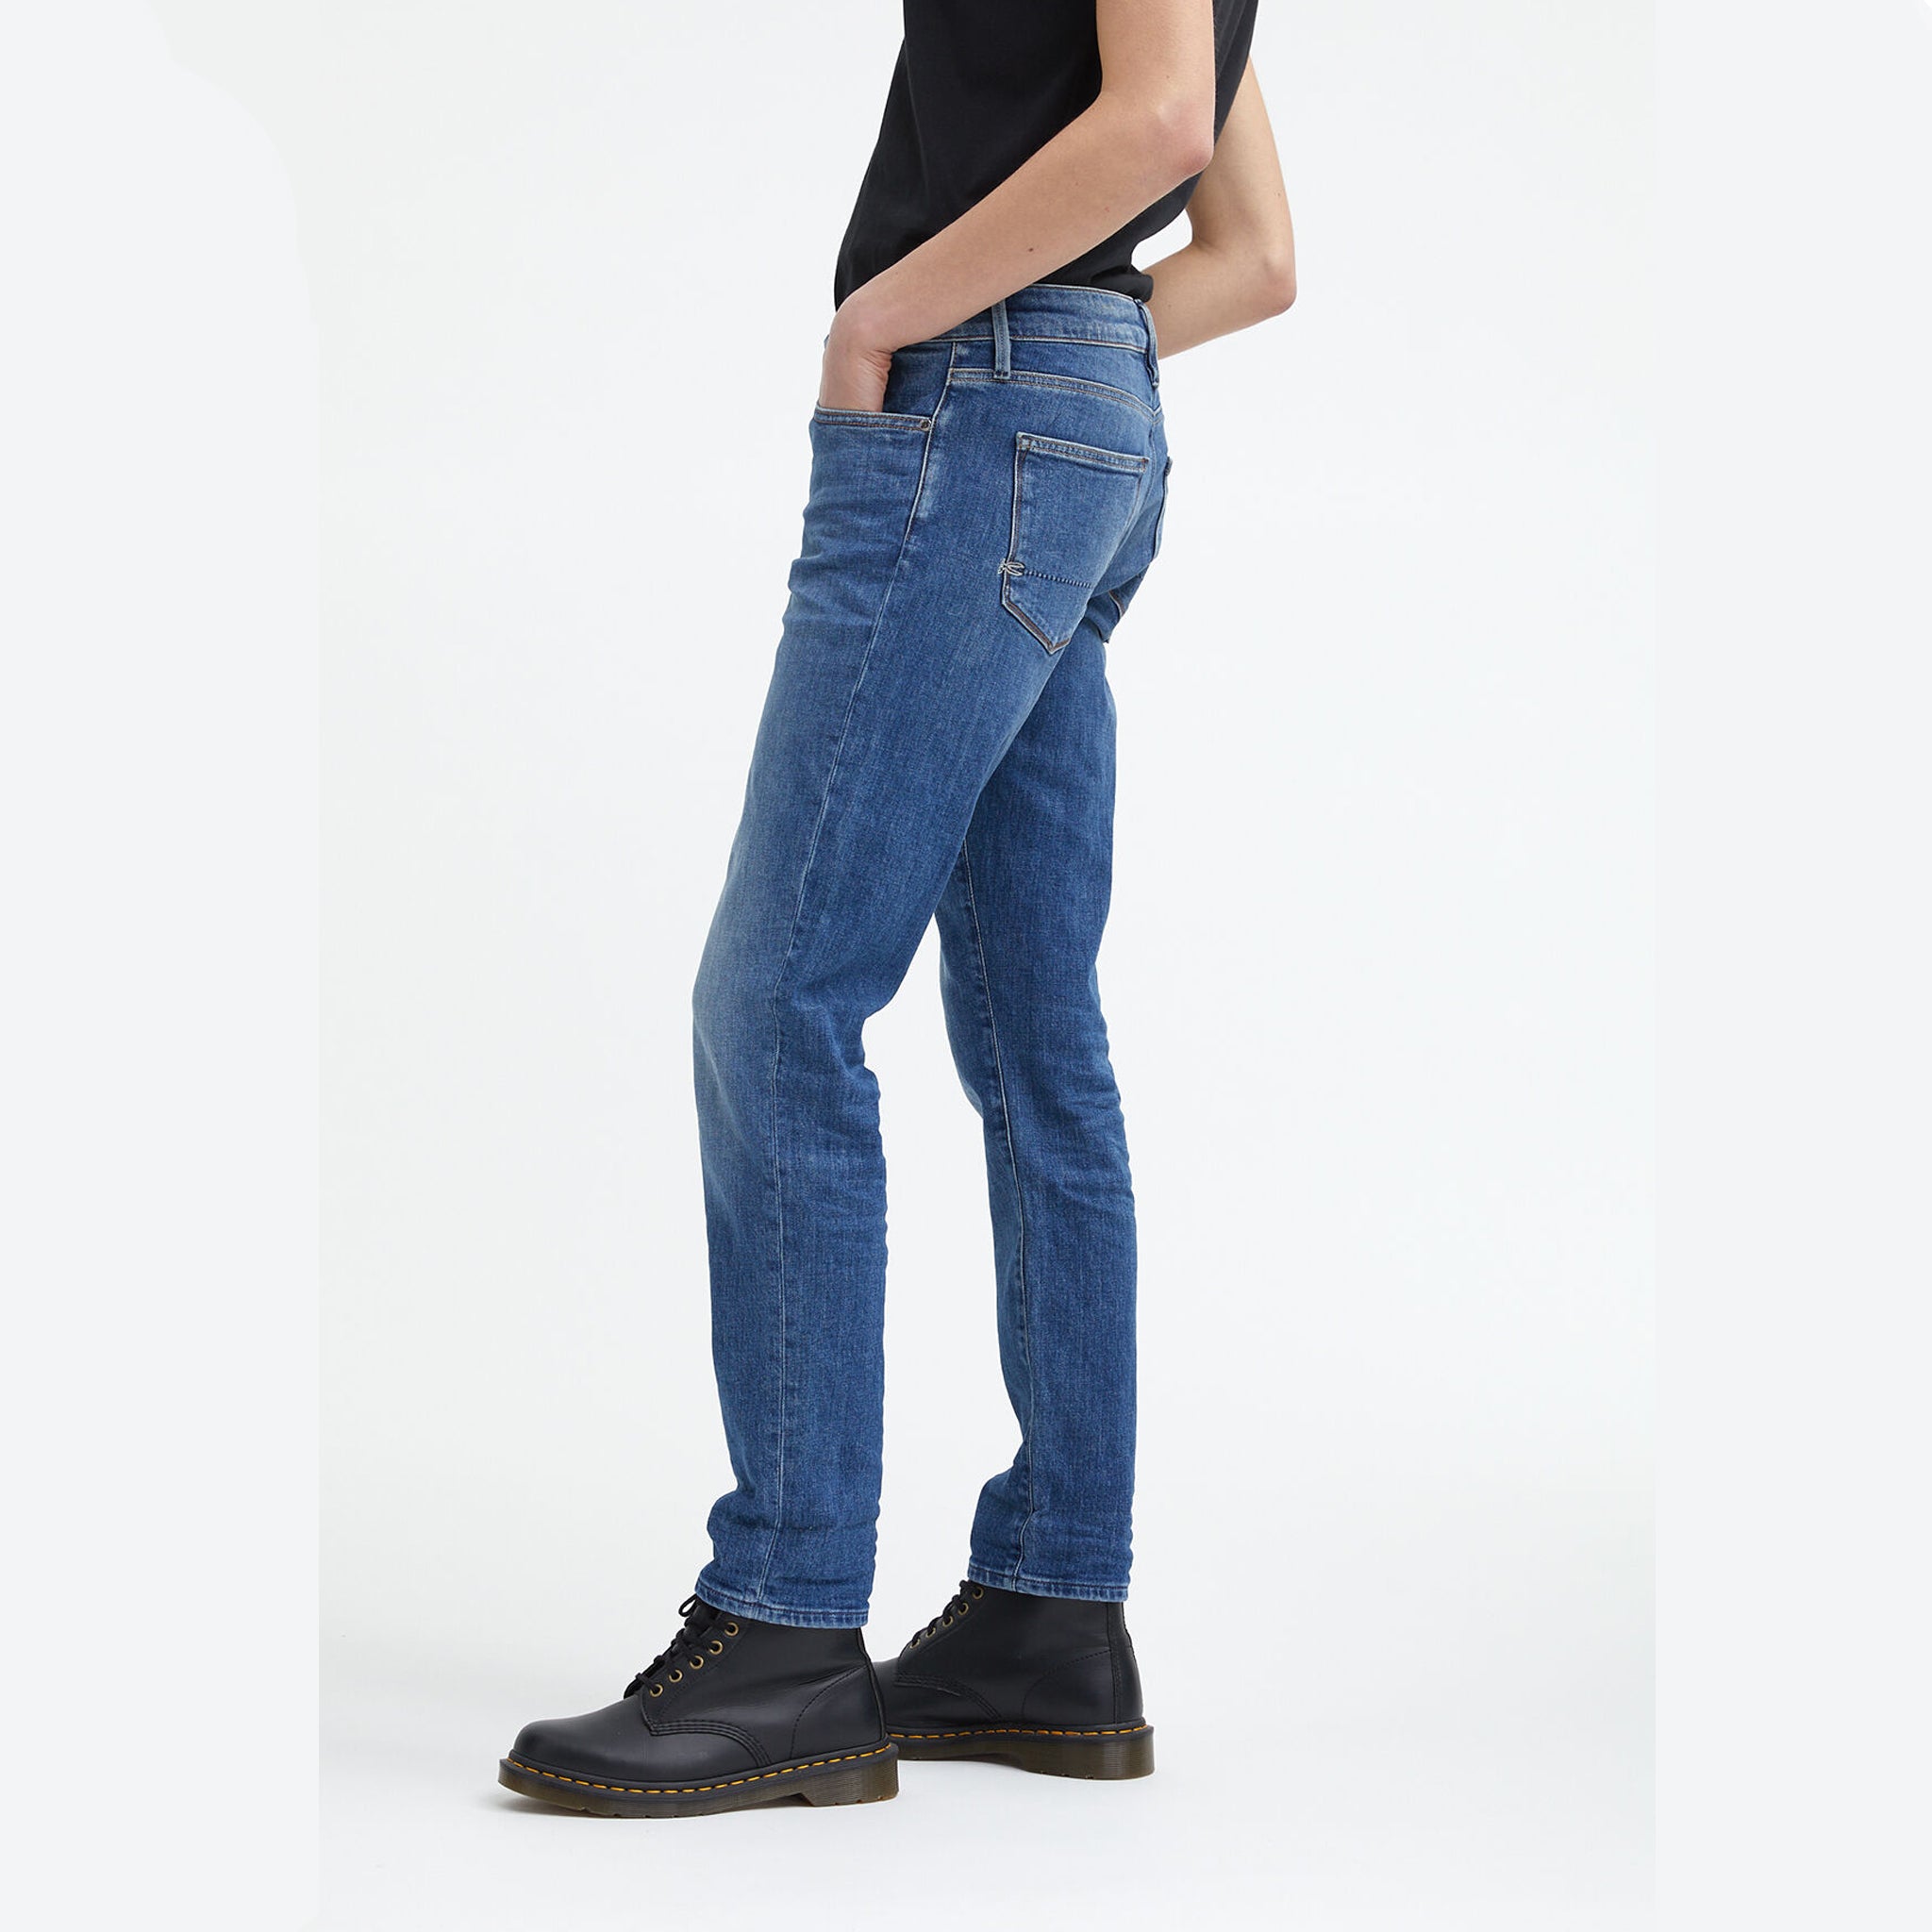 A woman wearing Denham's MONROE Mid Girlfriend - Light Fade & Whiskers jeans and a black t-shirt.